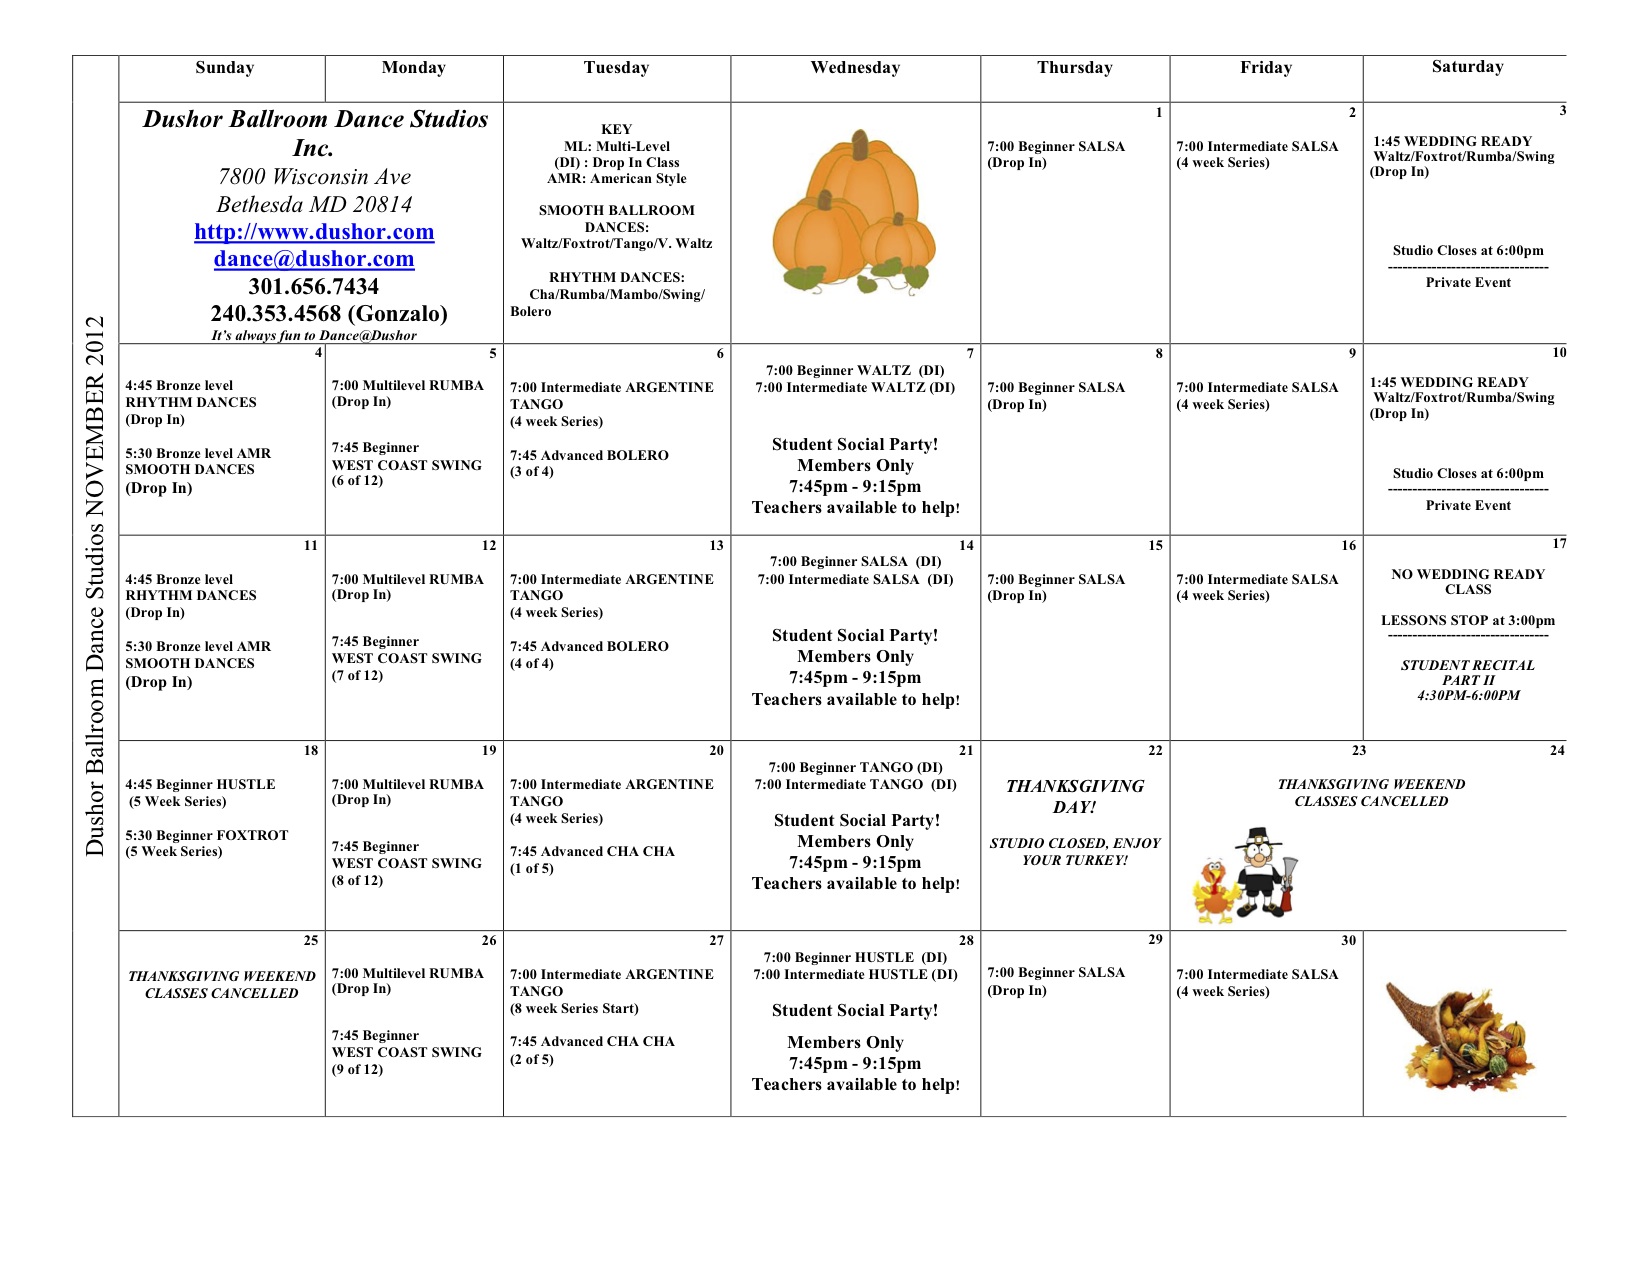 NOVEMBER Calendar, Please Email
                      Dance@dushor.com if you cannot view